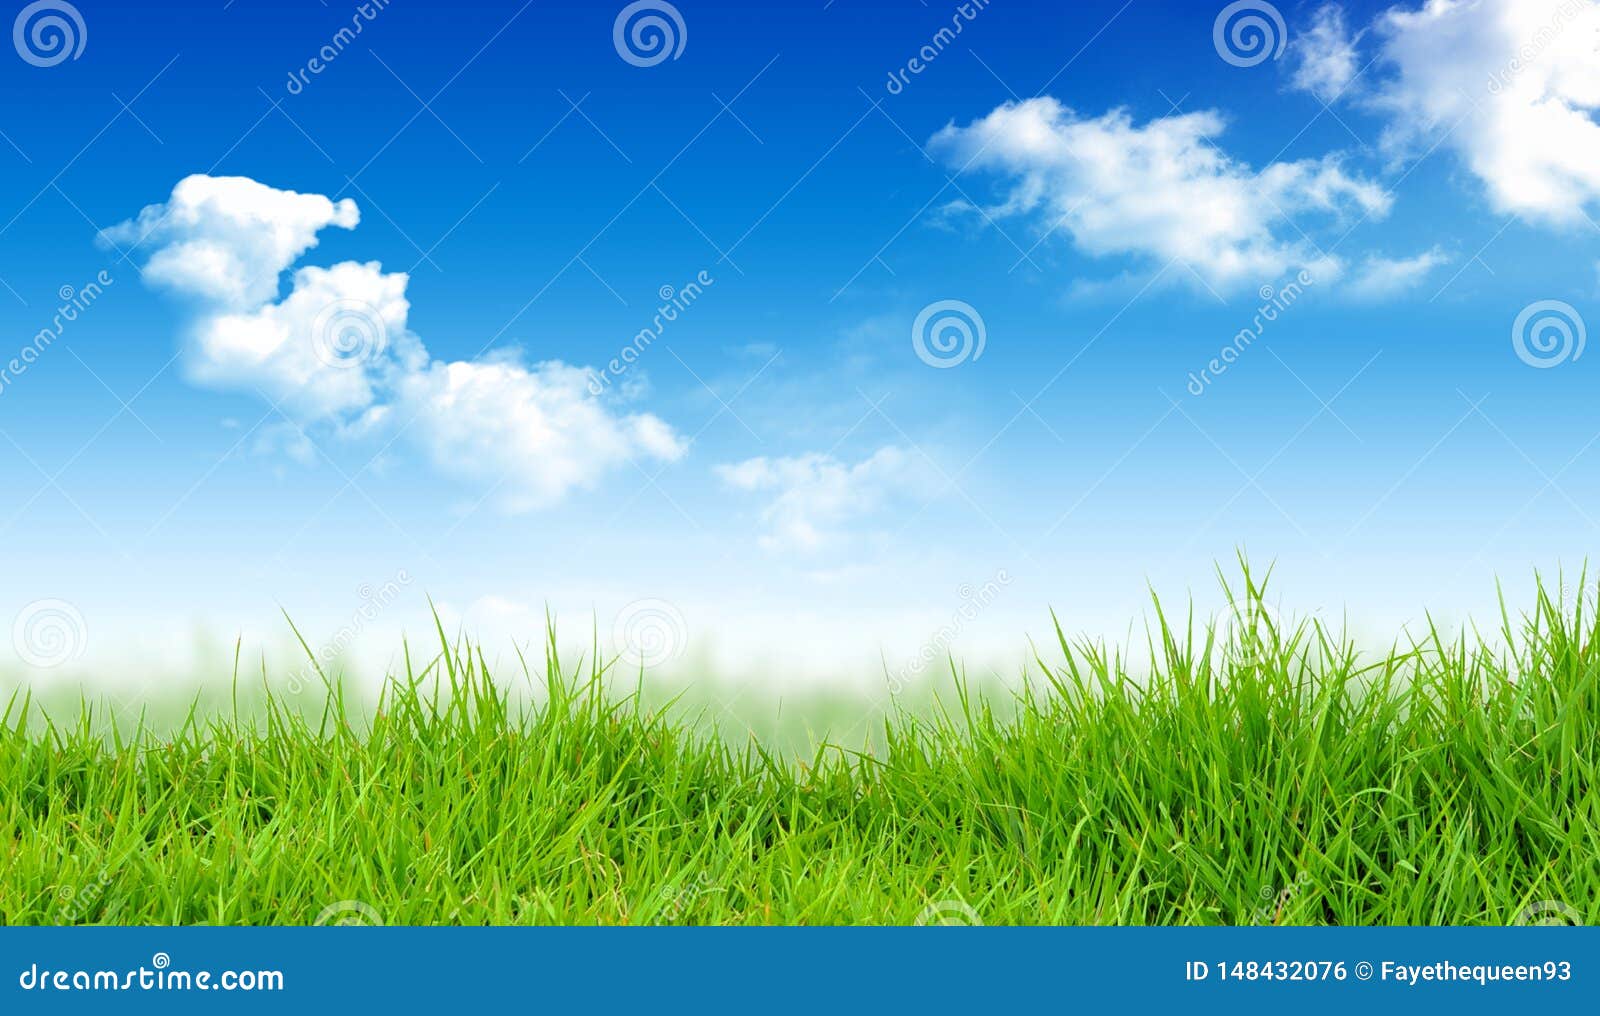 Spring Nature Background with Grass and Blue Sky. Stock Photo ...